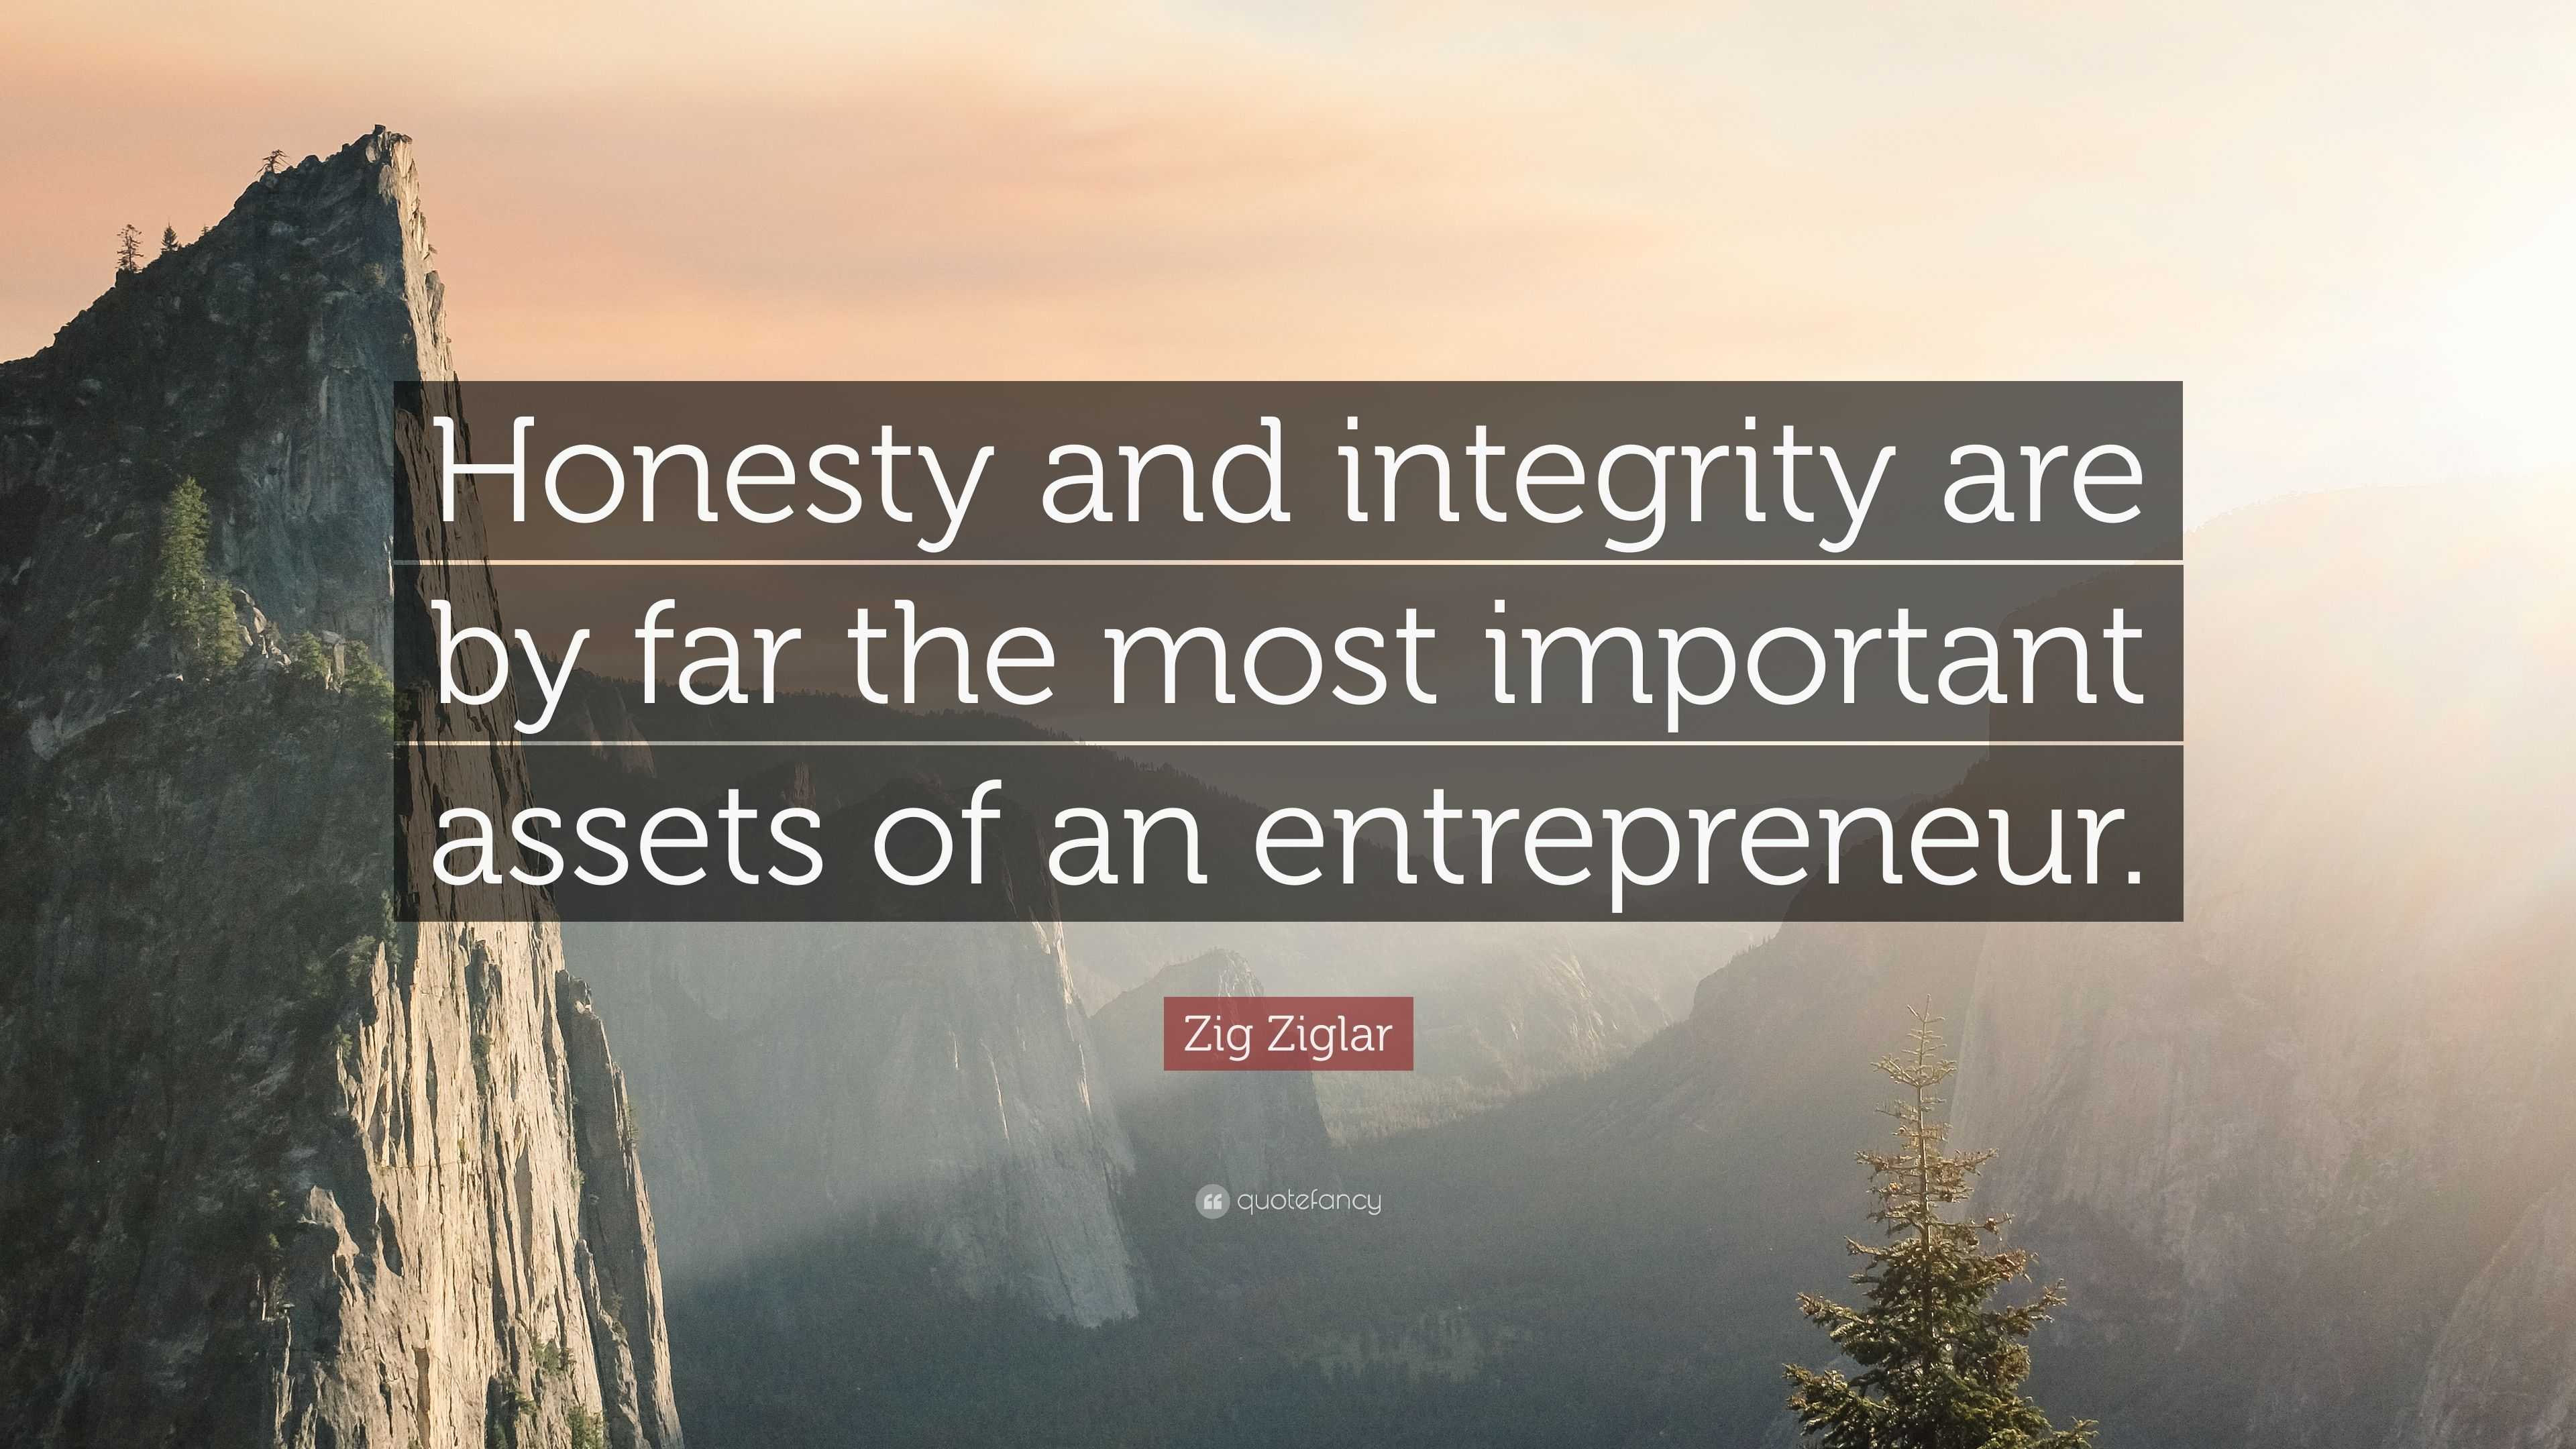 Zig Ziglar Quote: "Honesty and integrity are by far the ...